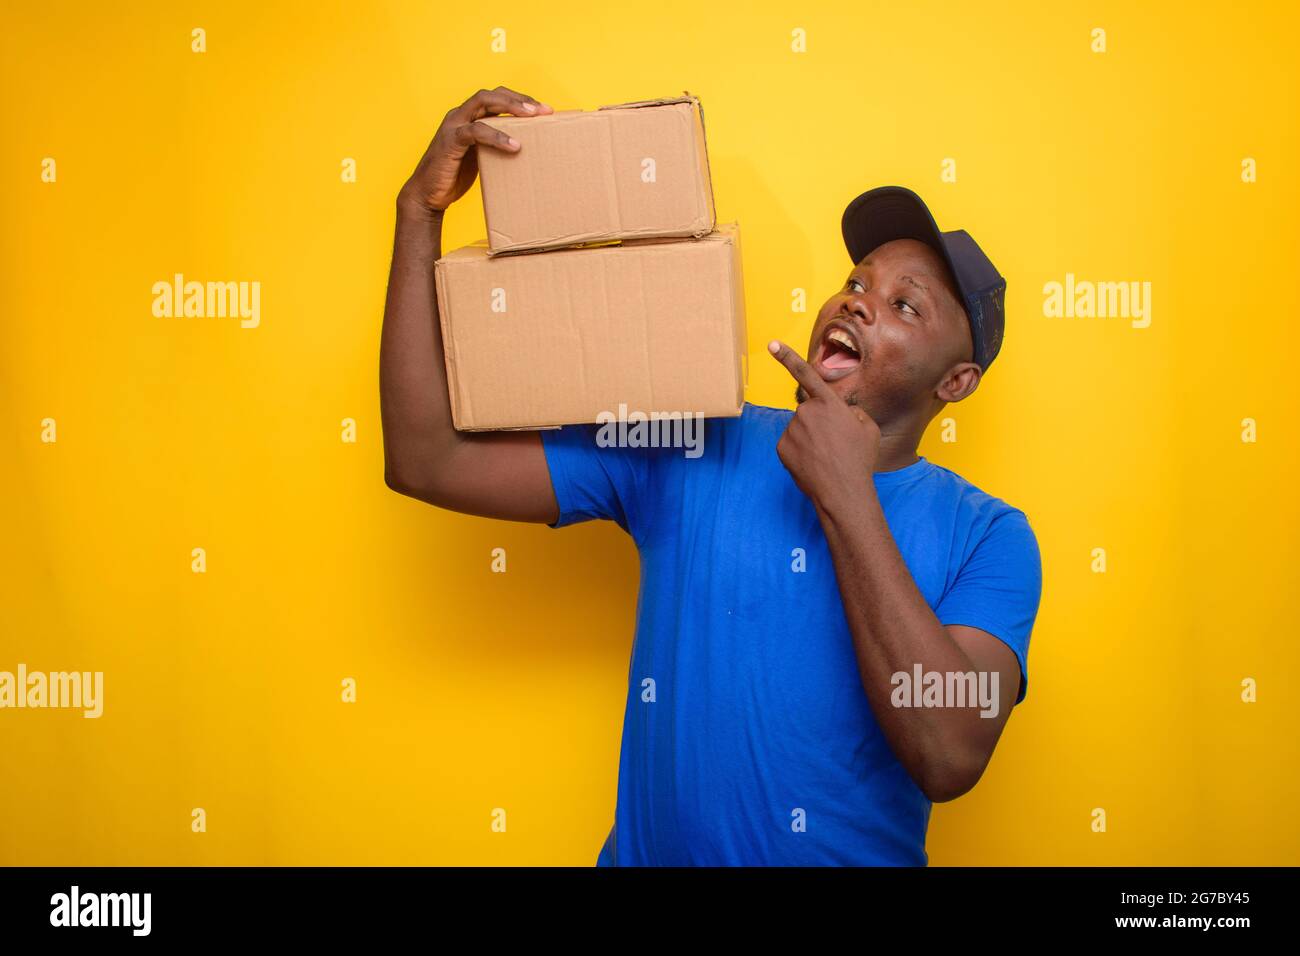 An African dispatch man with face cap, pointing to the boxes he is carrying on his shoulder Stock Photo